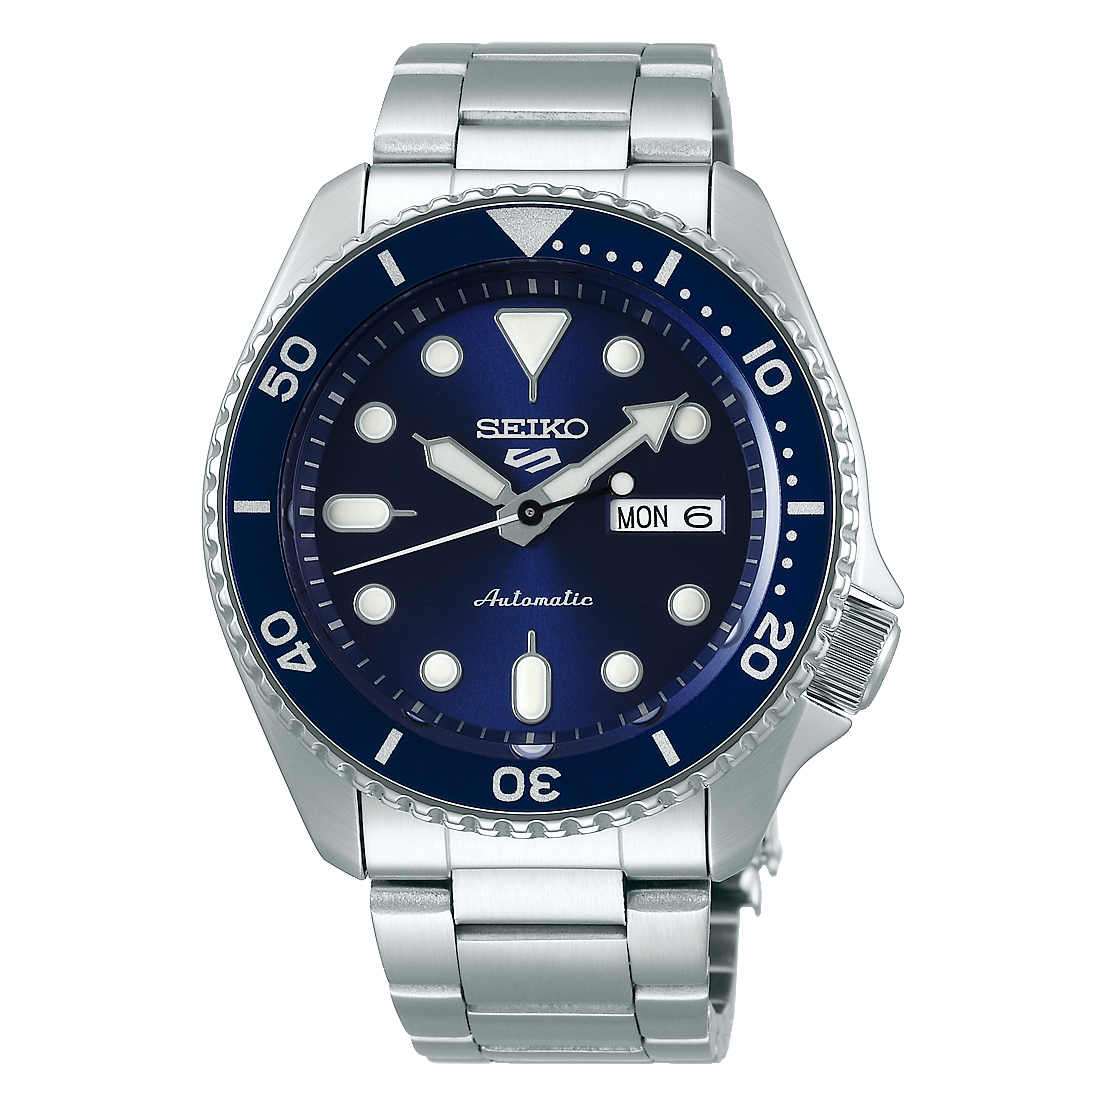 Gts Seiko SRPD51 Automatic Blue Face Watch